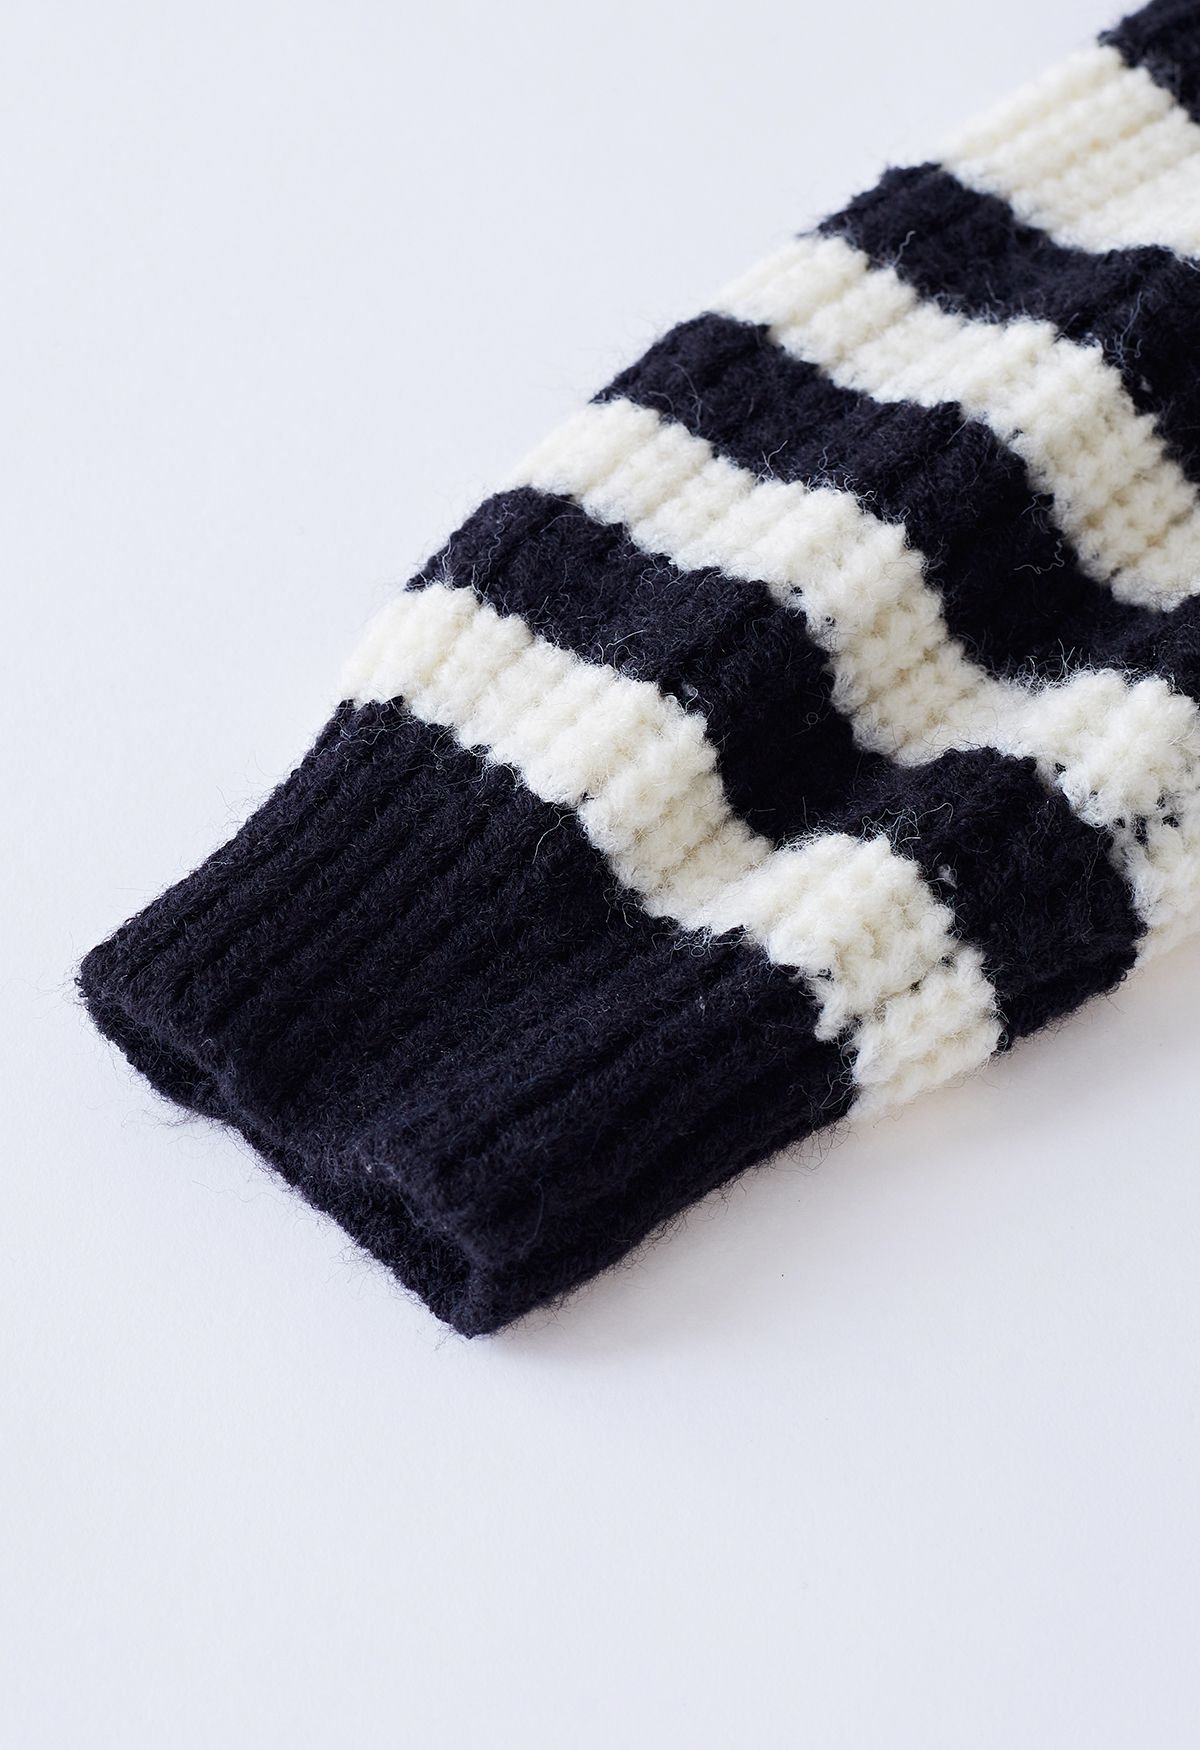 Detachable Scarf Striped Knit Sweater in Black